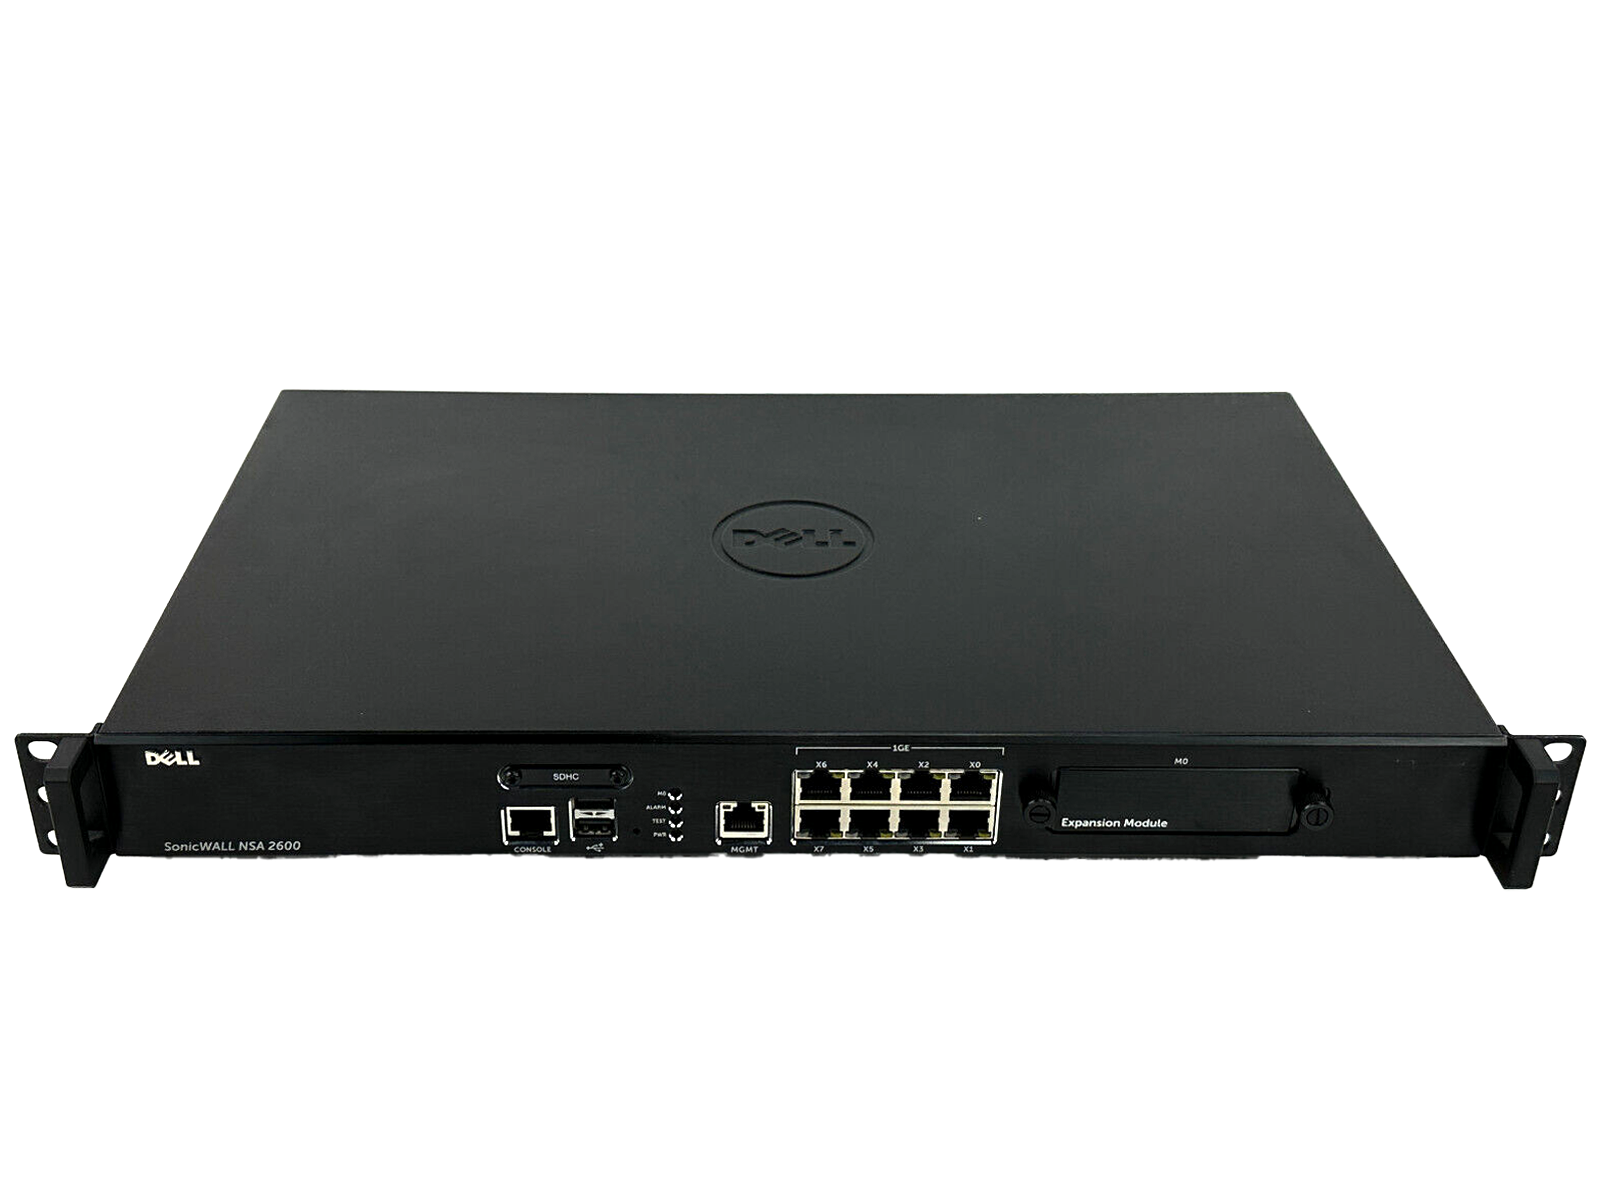 DELL SonicWALL 1RK29-0A9 NSA 2600 Network Security Appliance Firewall 8 x 1GbE RJ45 Ports.